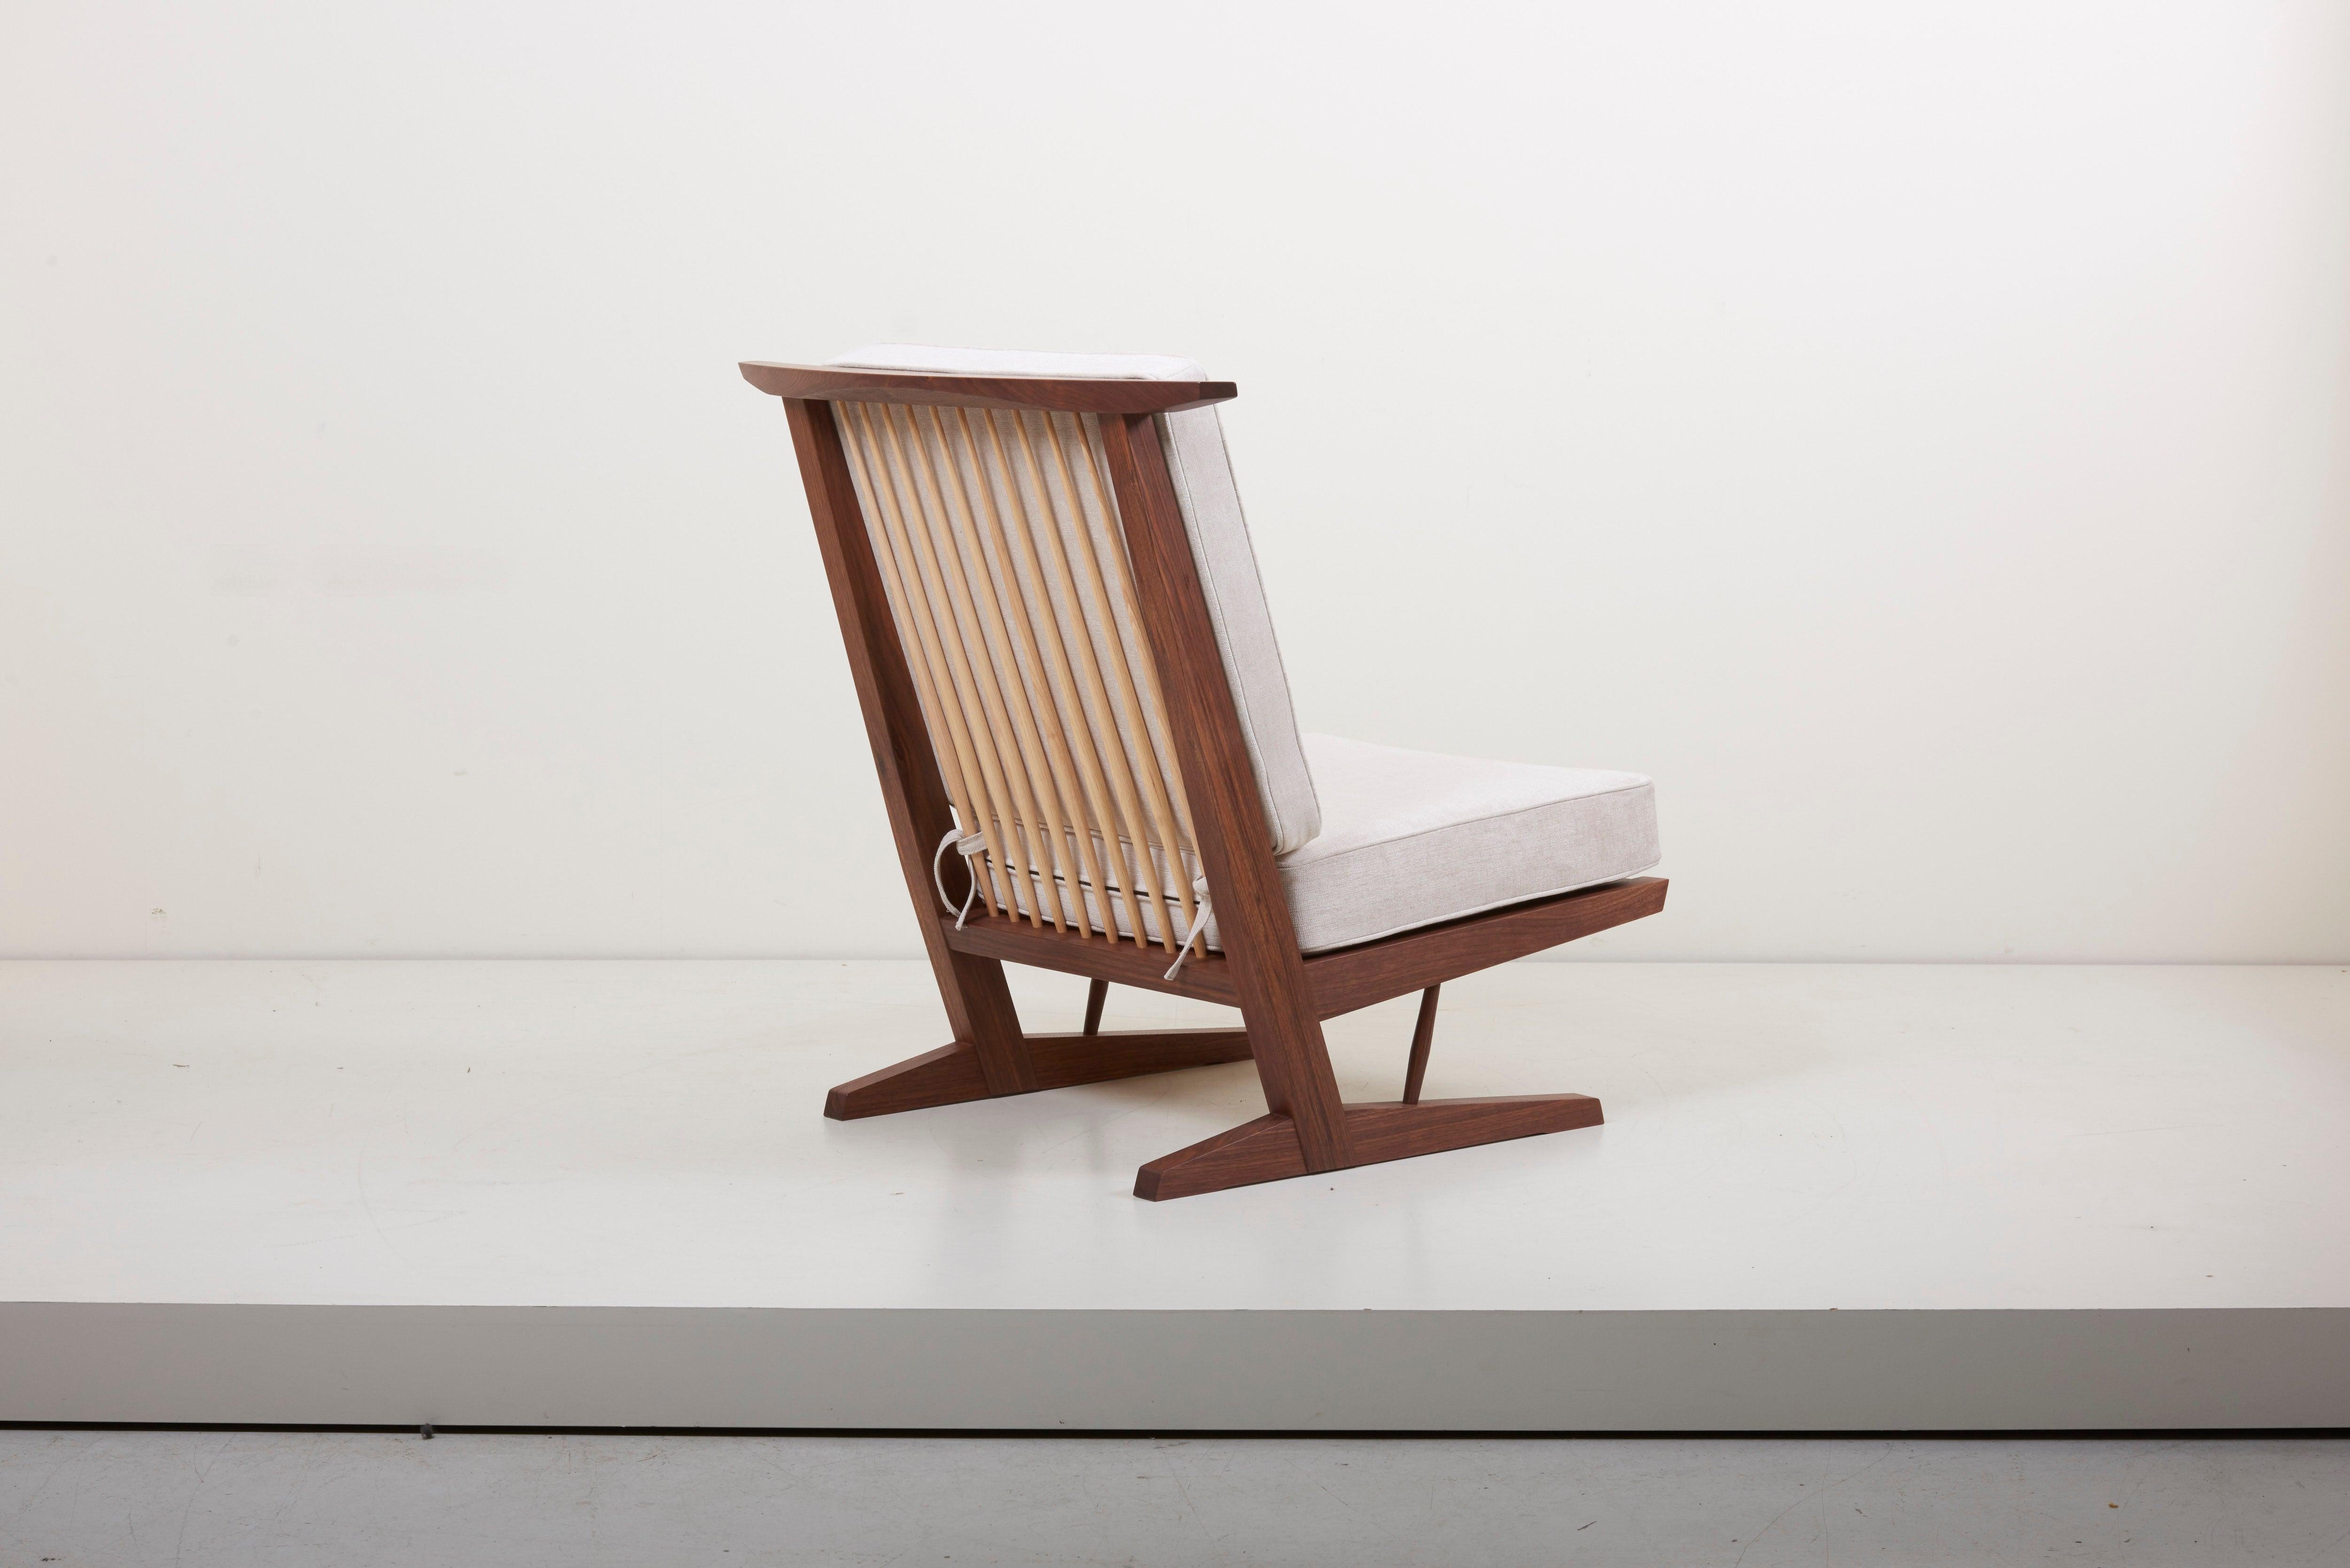 Conoid lounge chair in American black walnut with hickory spindles by Mira Nakashima. Based on a design by George Nakashima.

Newly upholstered in Mark Alexander fabric. Production Lead time is around 18 months.